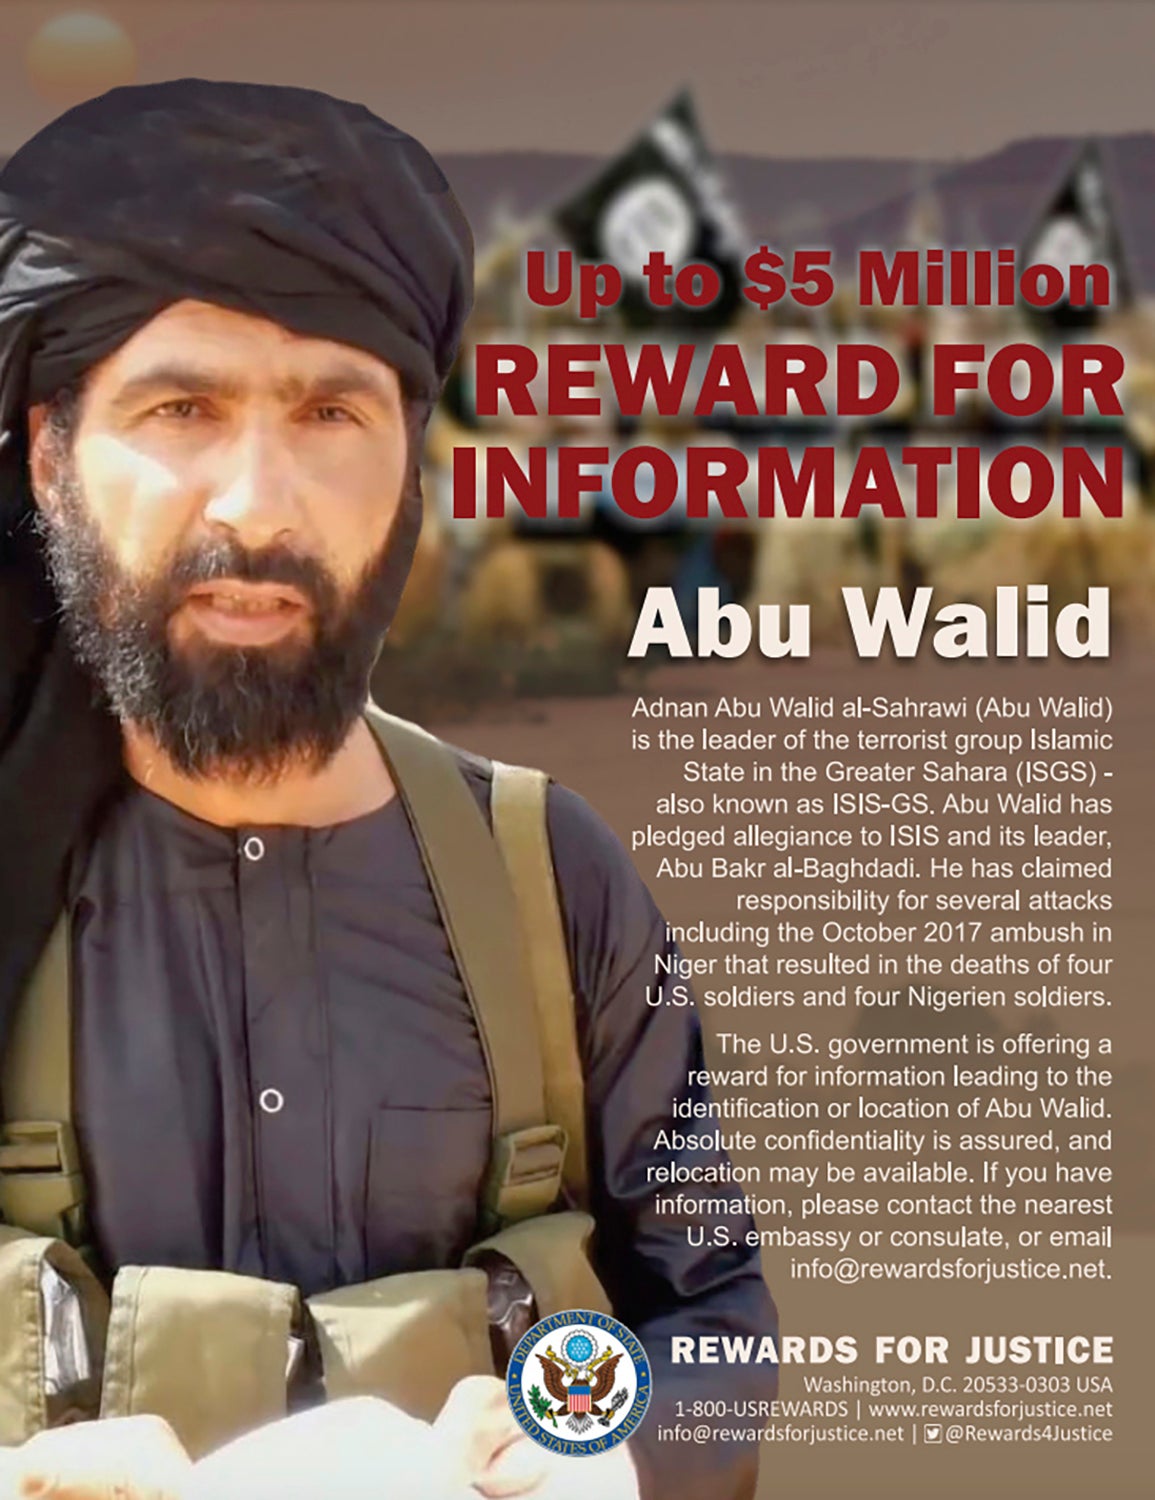 A wanted poster for Adnan Abu Walid al-Sahrawi who is believed to have been killed by France